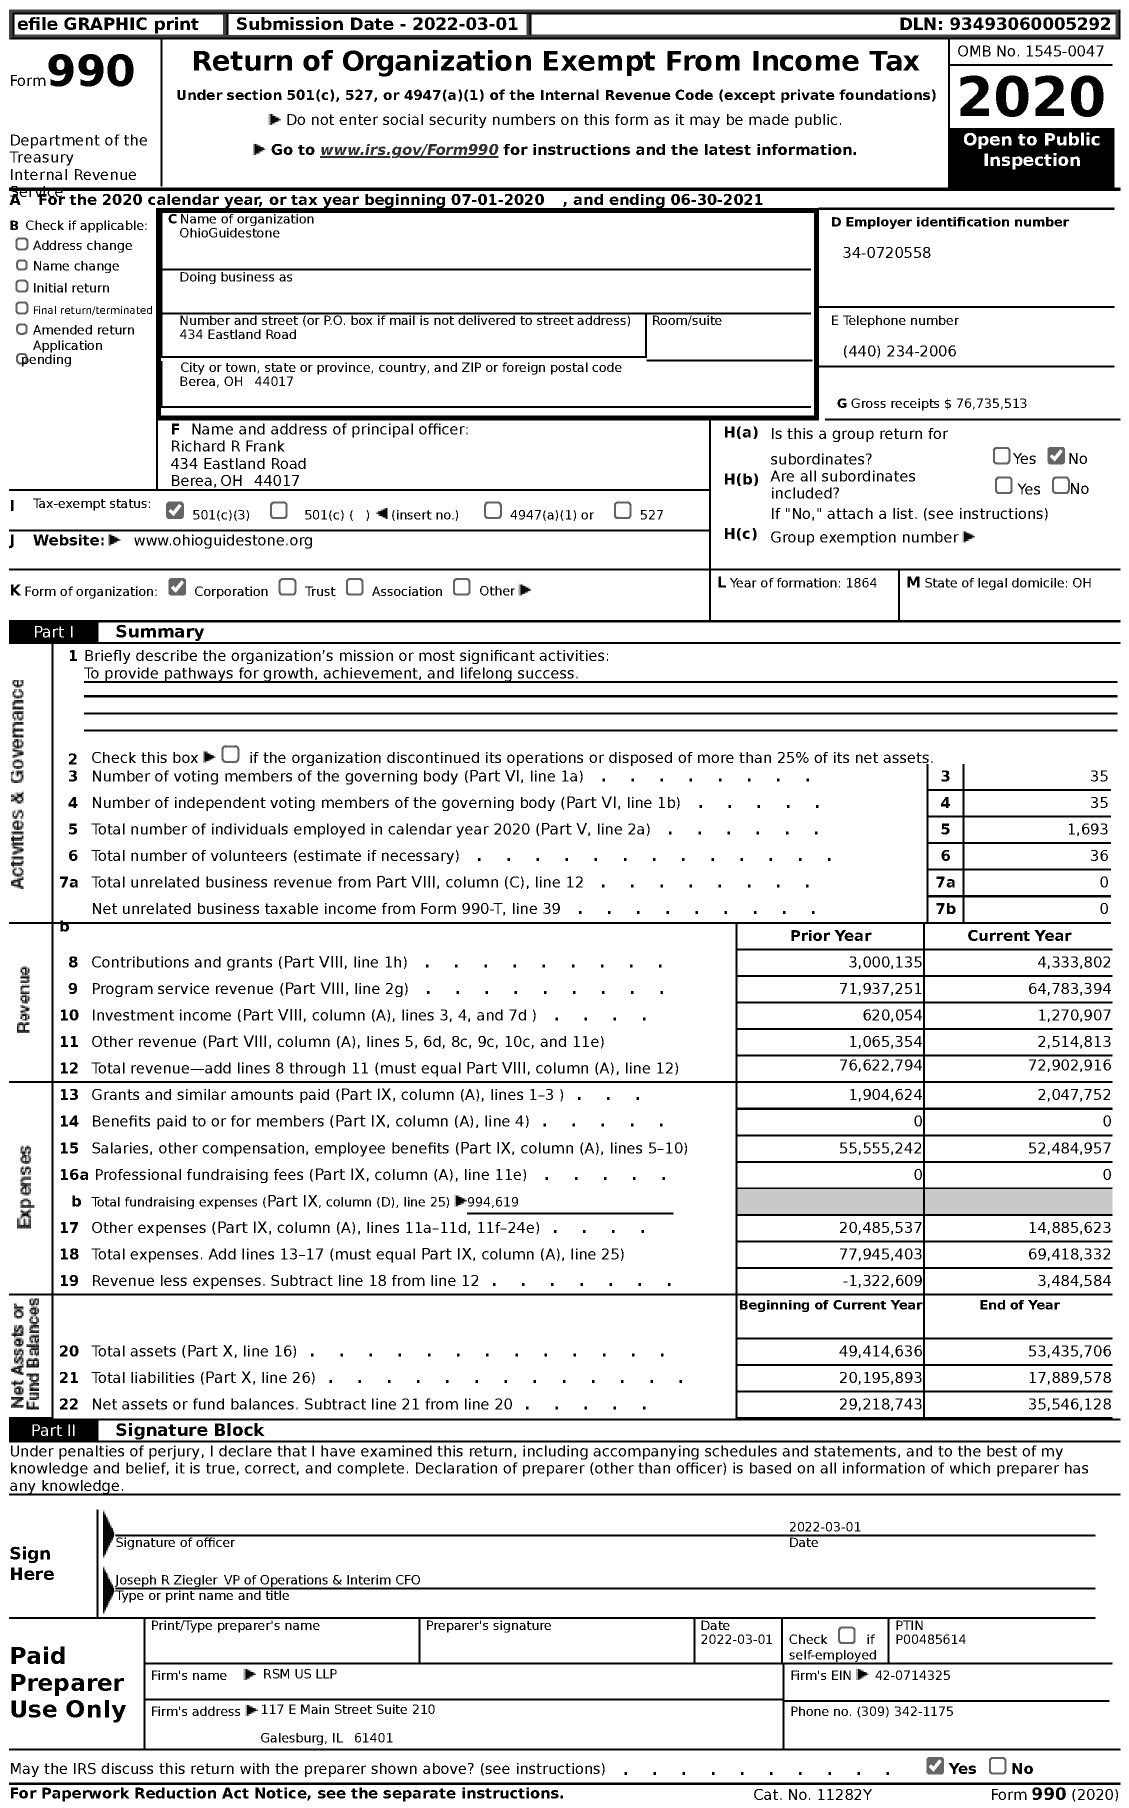 Image of first page of 2020 Form 990 for Ohioguidestone (OG)